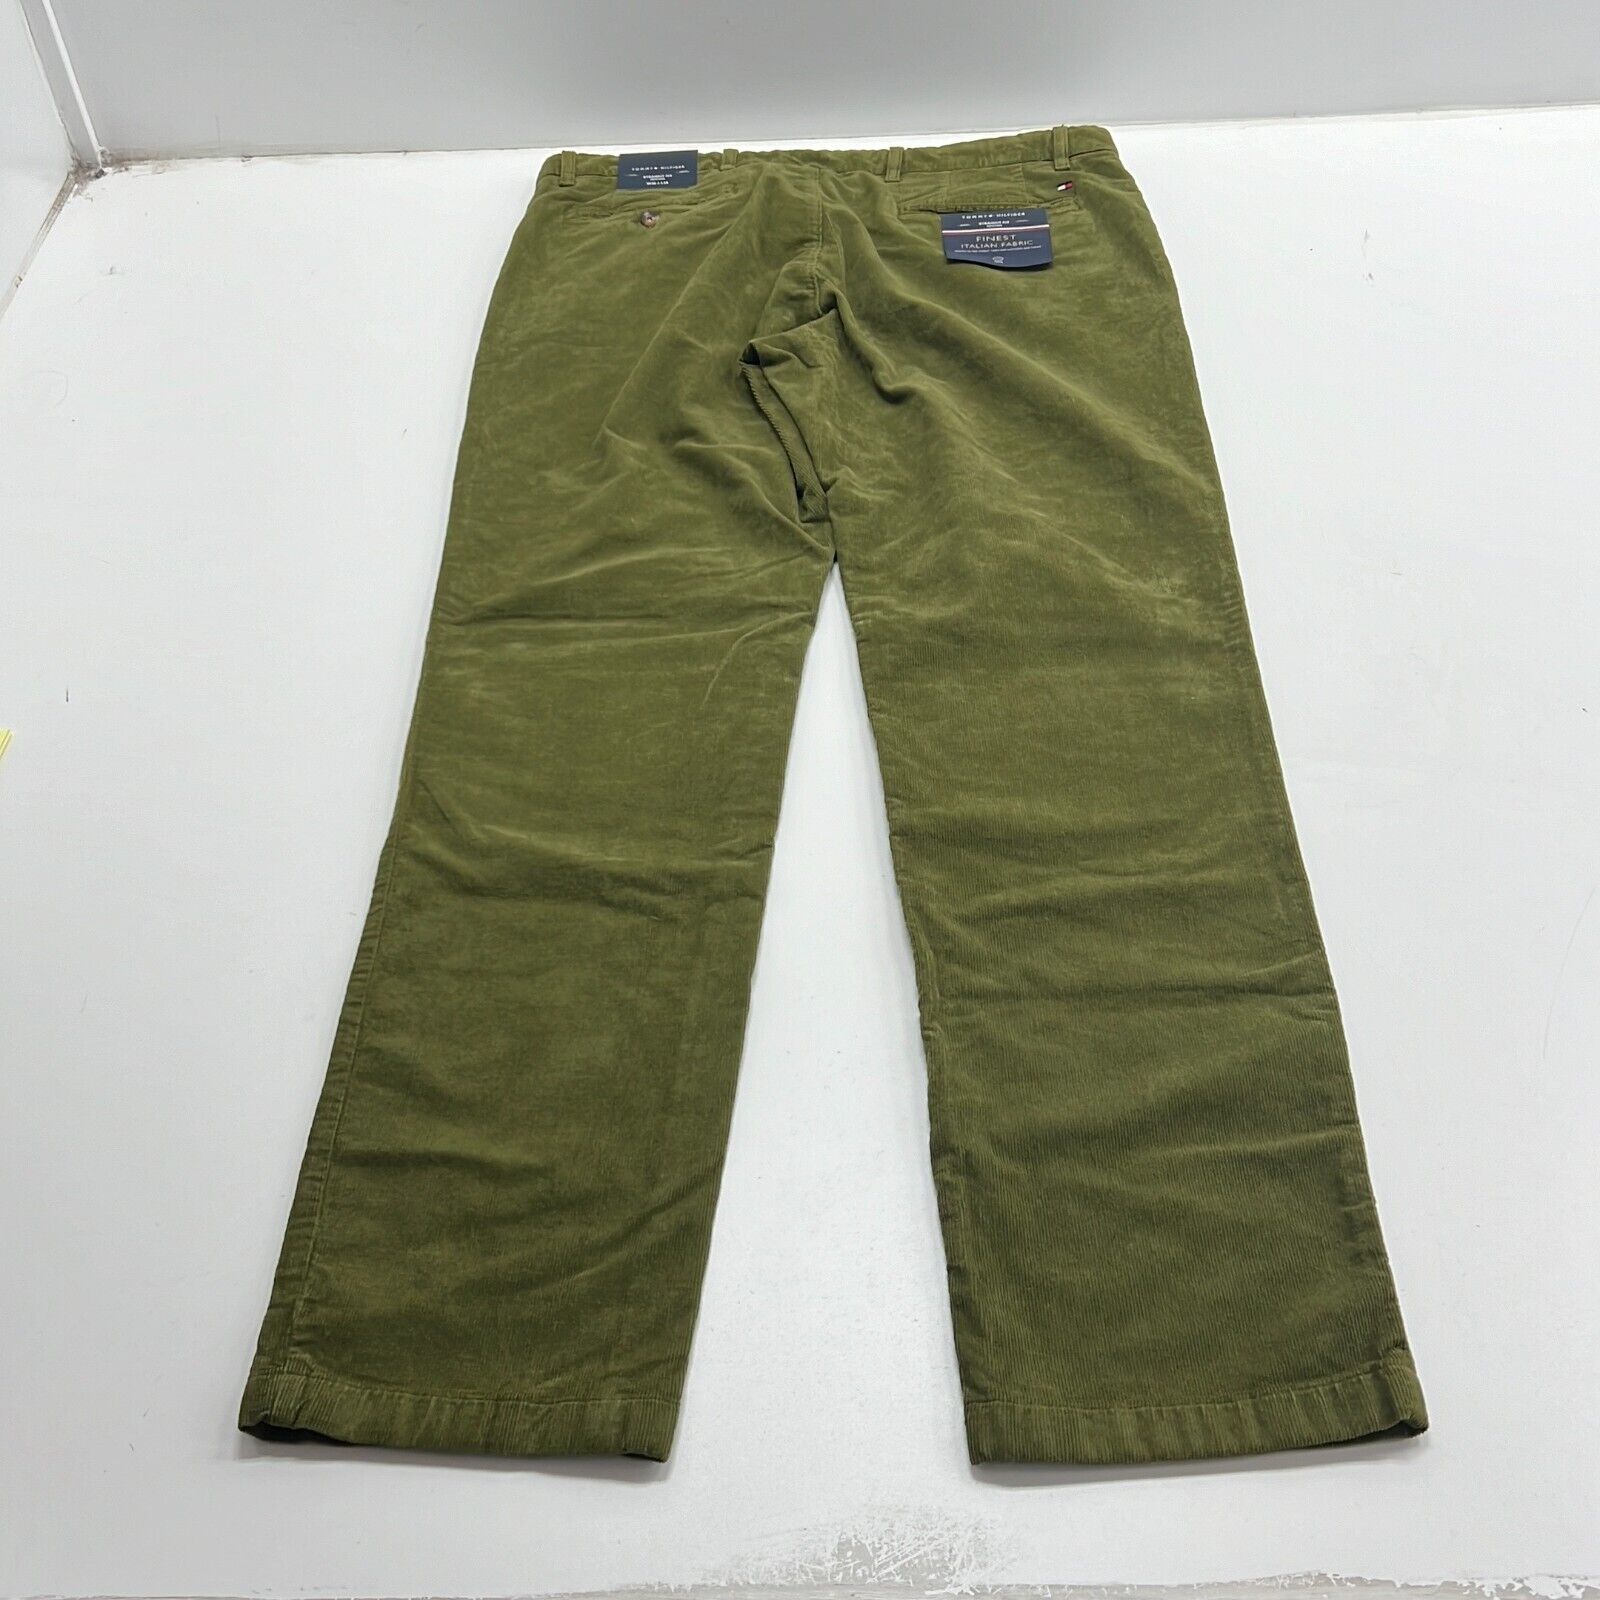 NWT Tommy Hilfiger Men's Green Straight Fit Corduroy Chino Pants Size 36x34